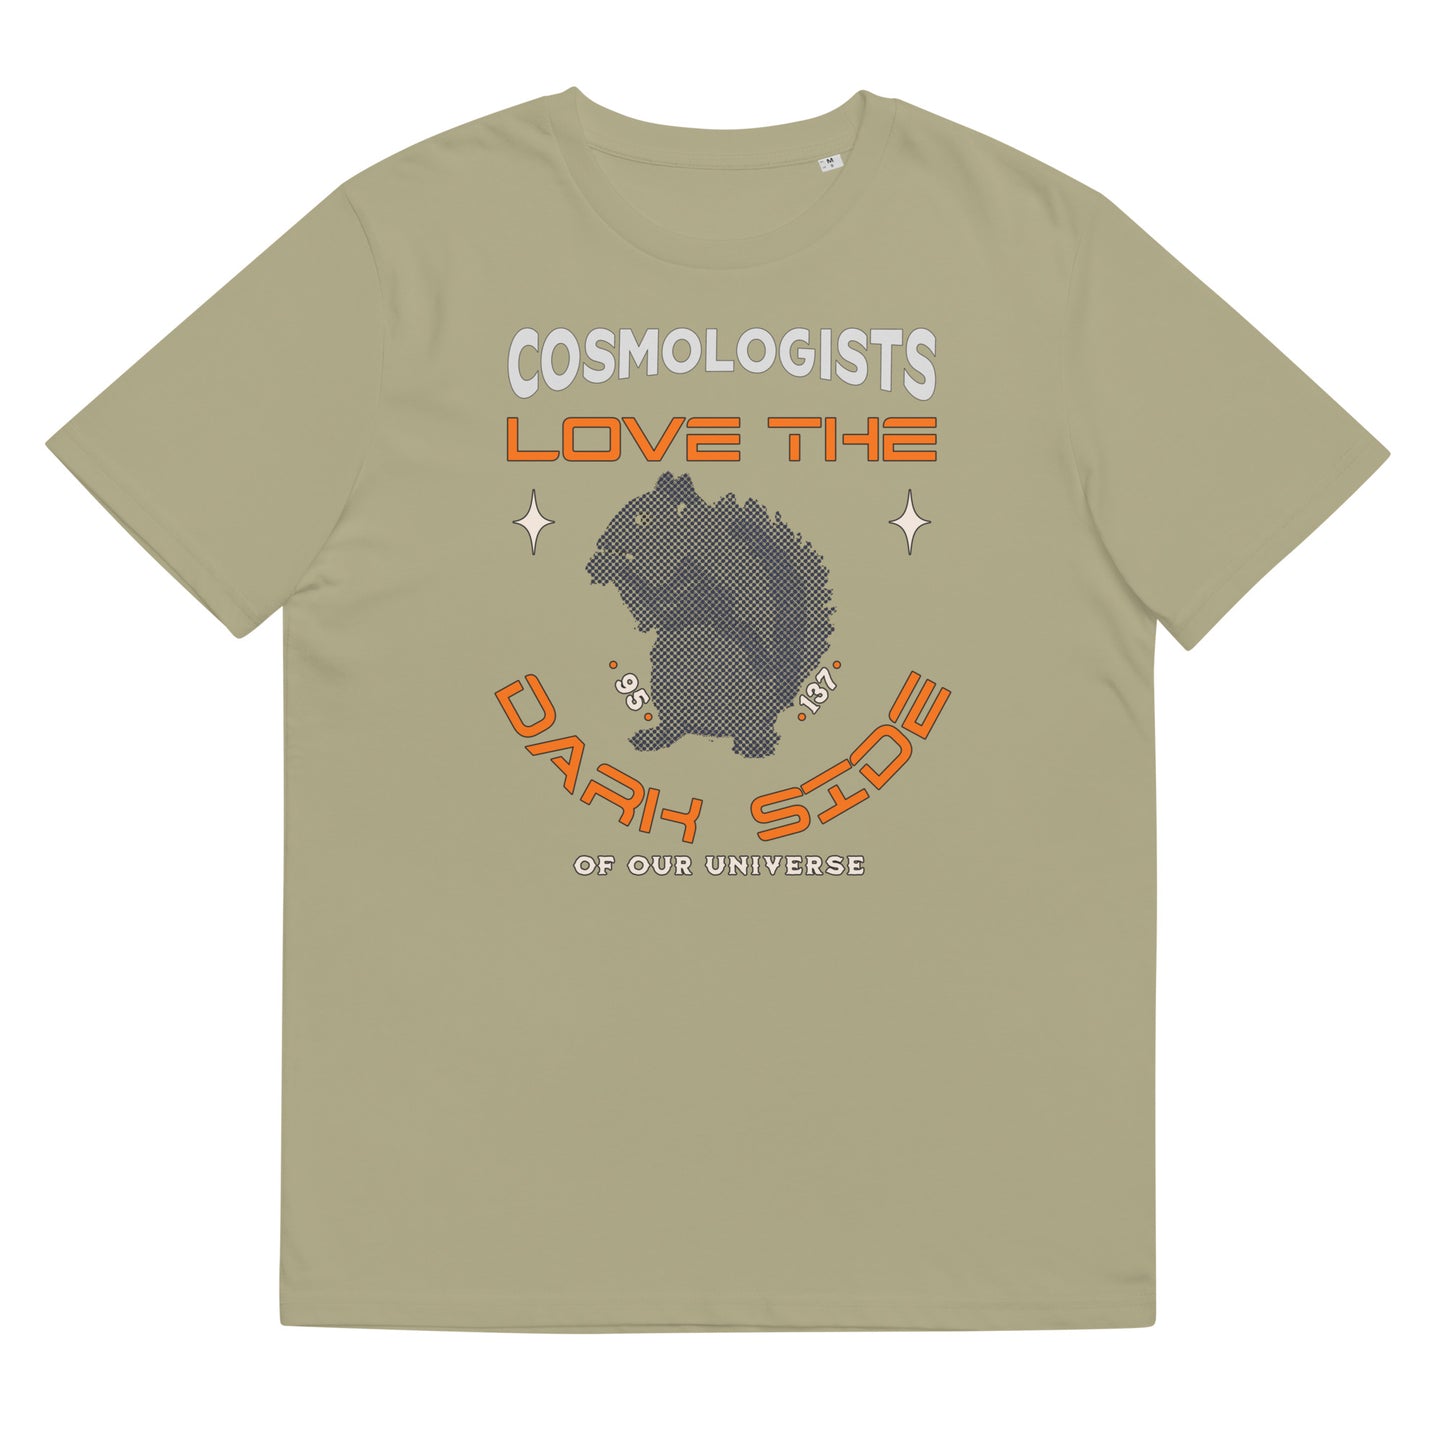 Unisex organic cotton t-shirt - Cosmologists Love The Dark Side Of Our Universe